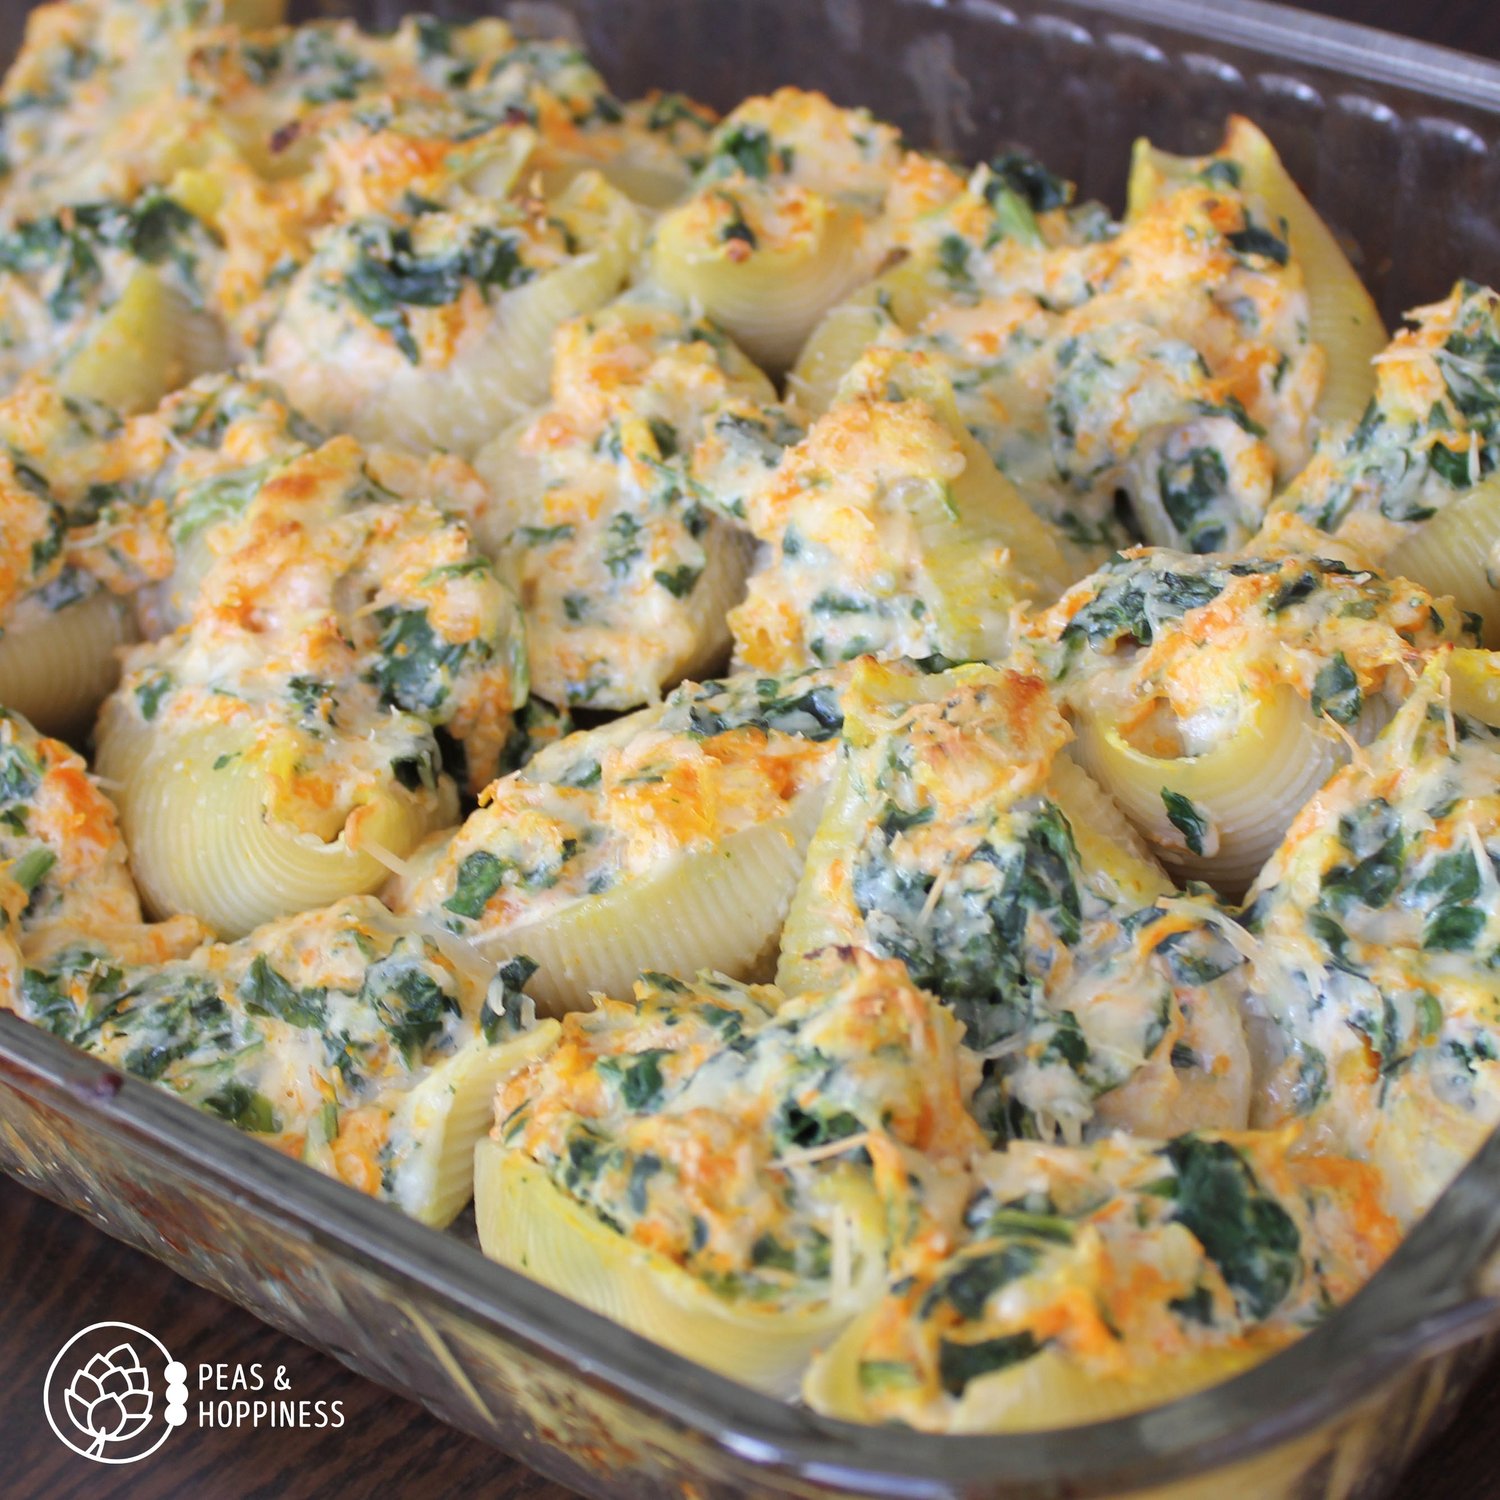 Give the Gift of a Home-Cooked Meal with the Peas & Hoppy Meal Guides - Butternut Squash and Spinach Stuffed Shells